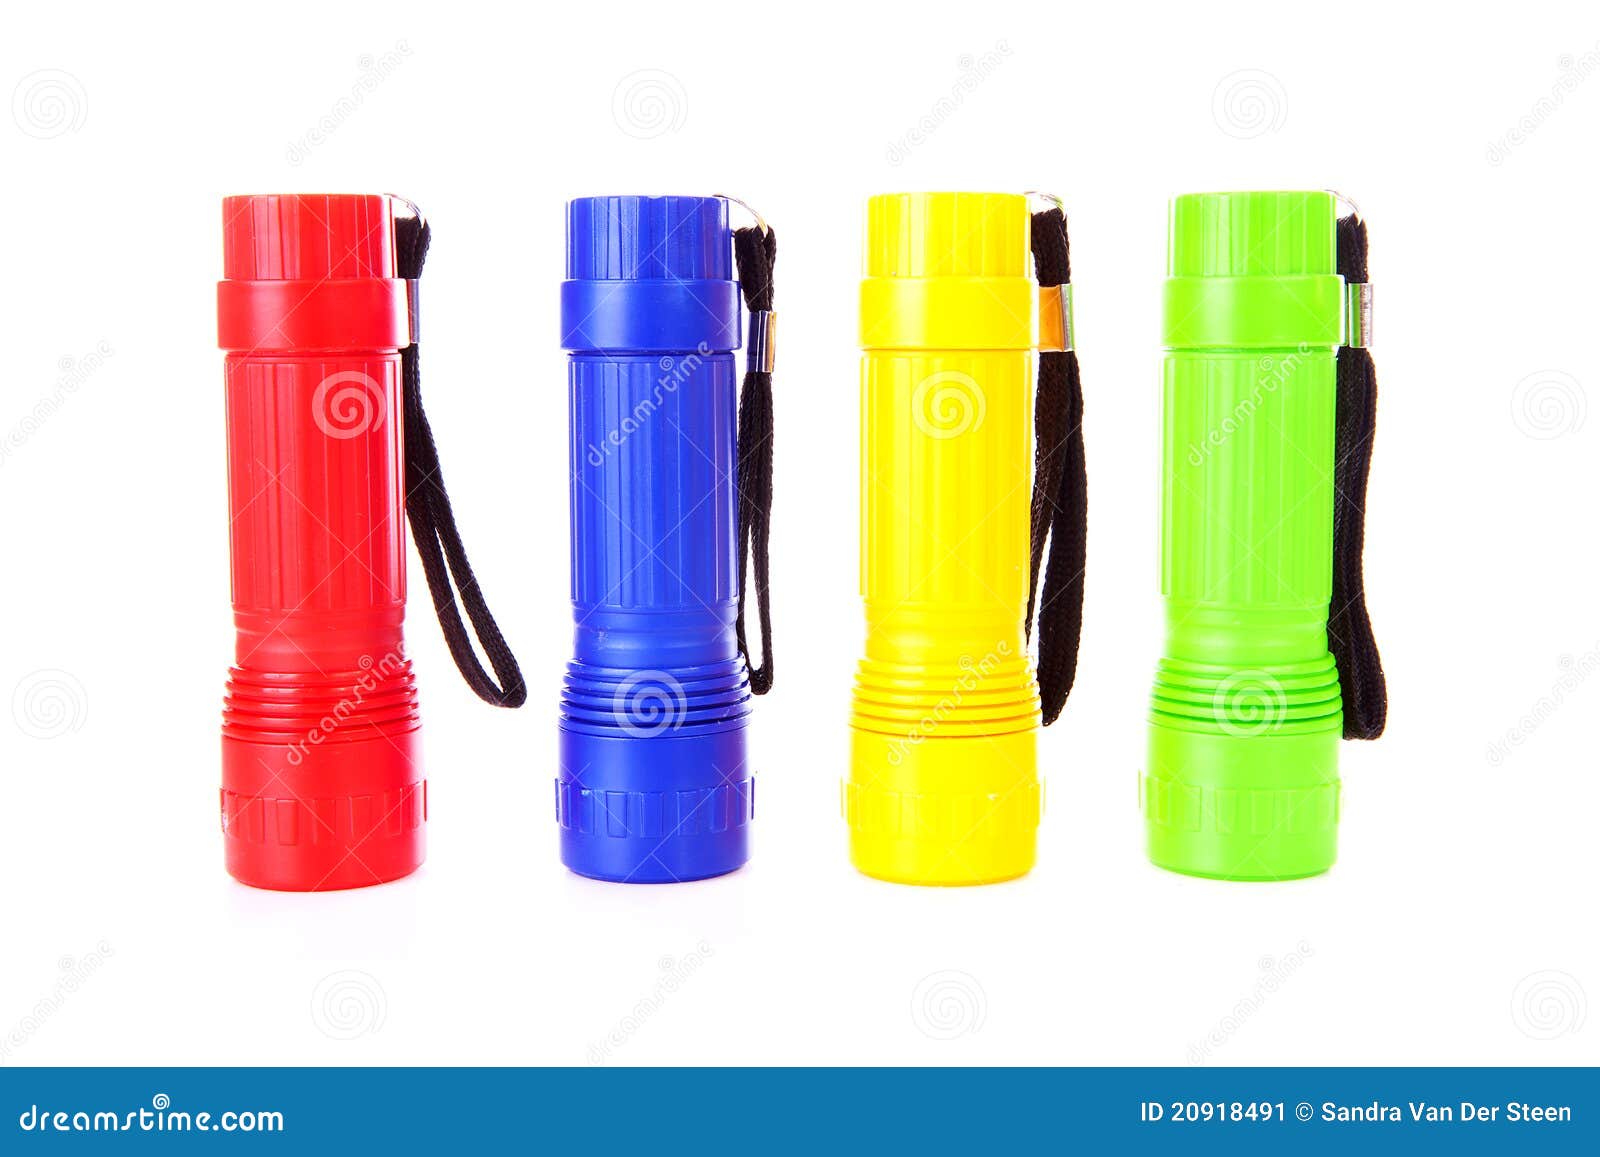 Four Colorful Flashlights Stock Image Image 20918491 Coloring Wallpapers Download Free Images Wallpaper [coloring654.blogspot.com]